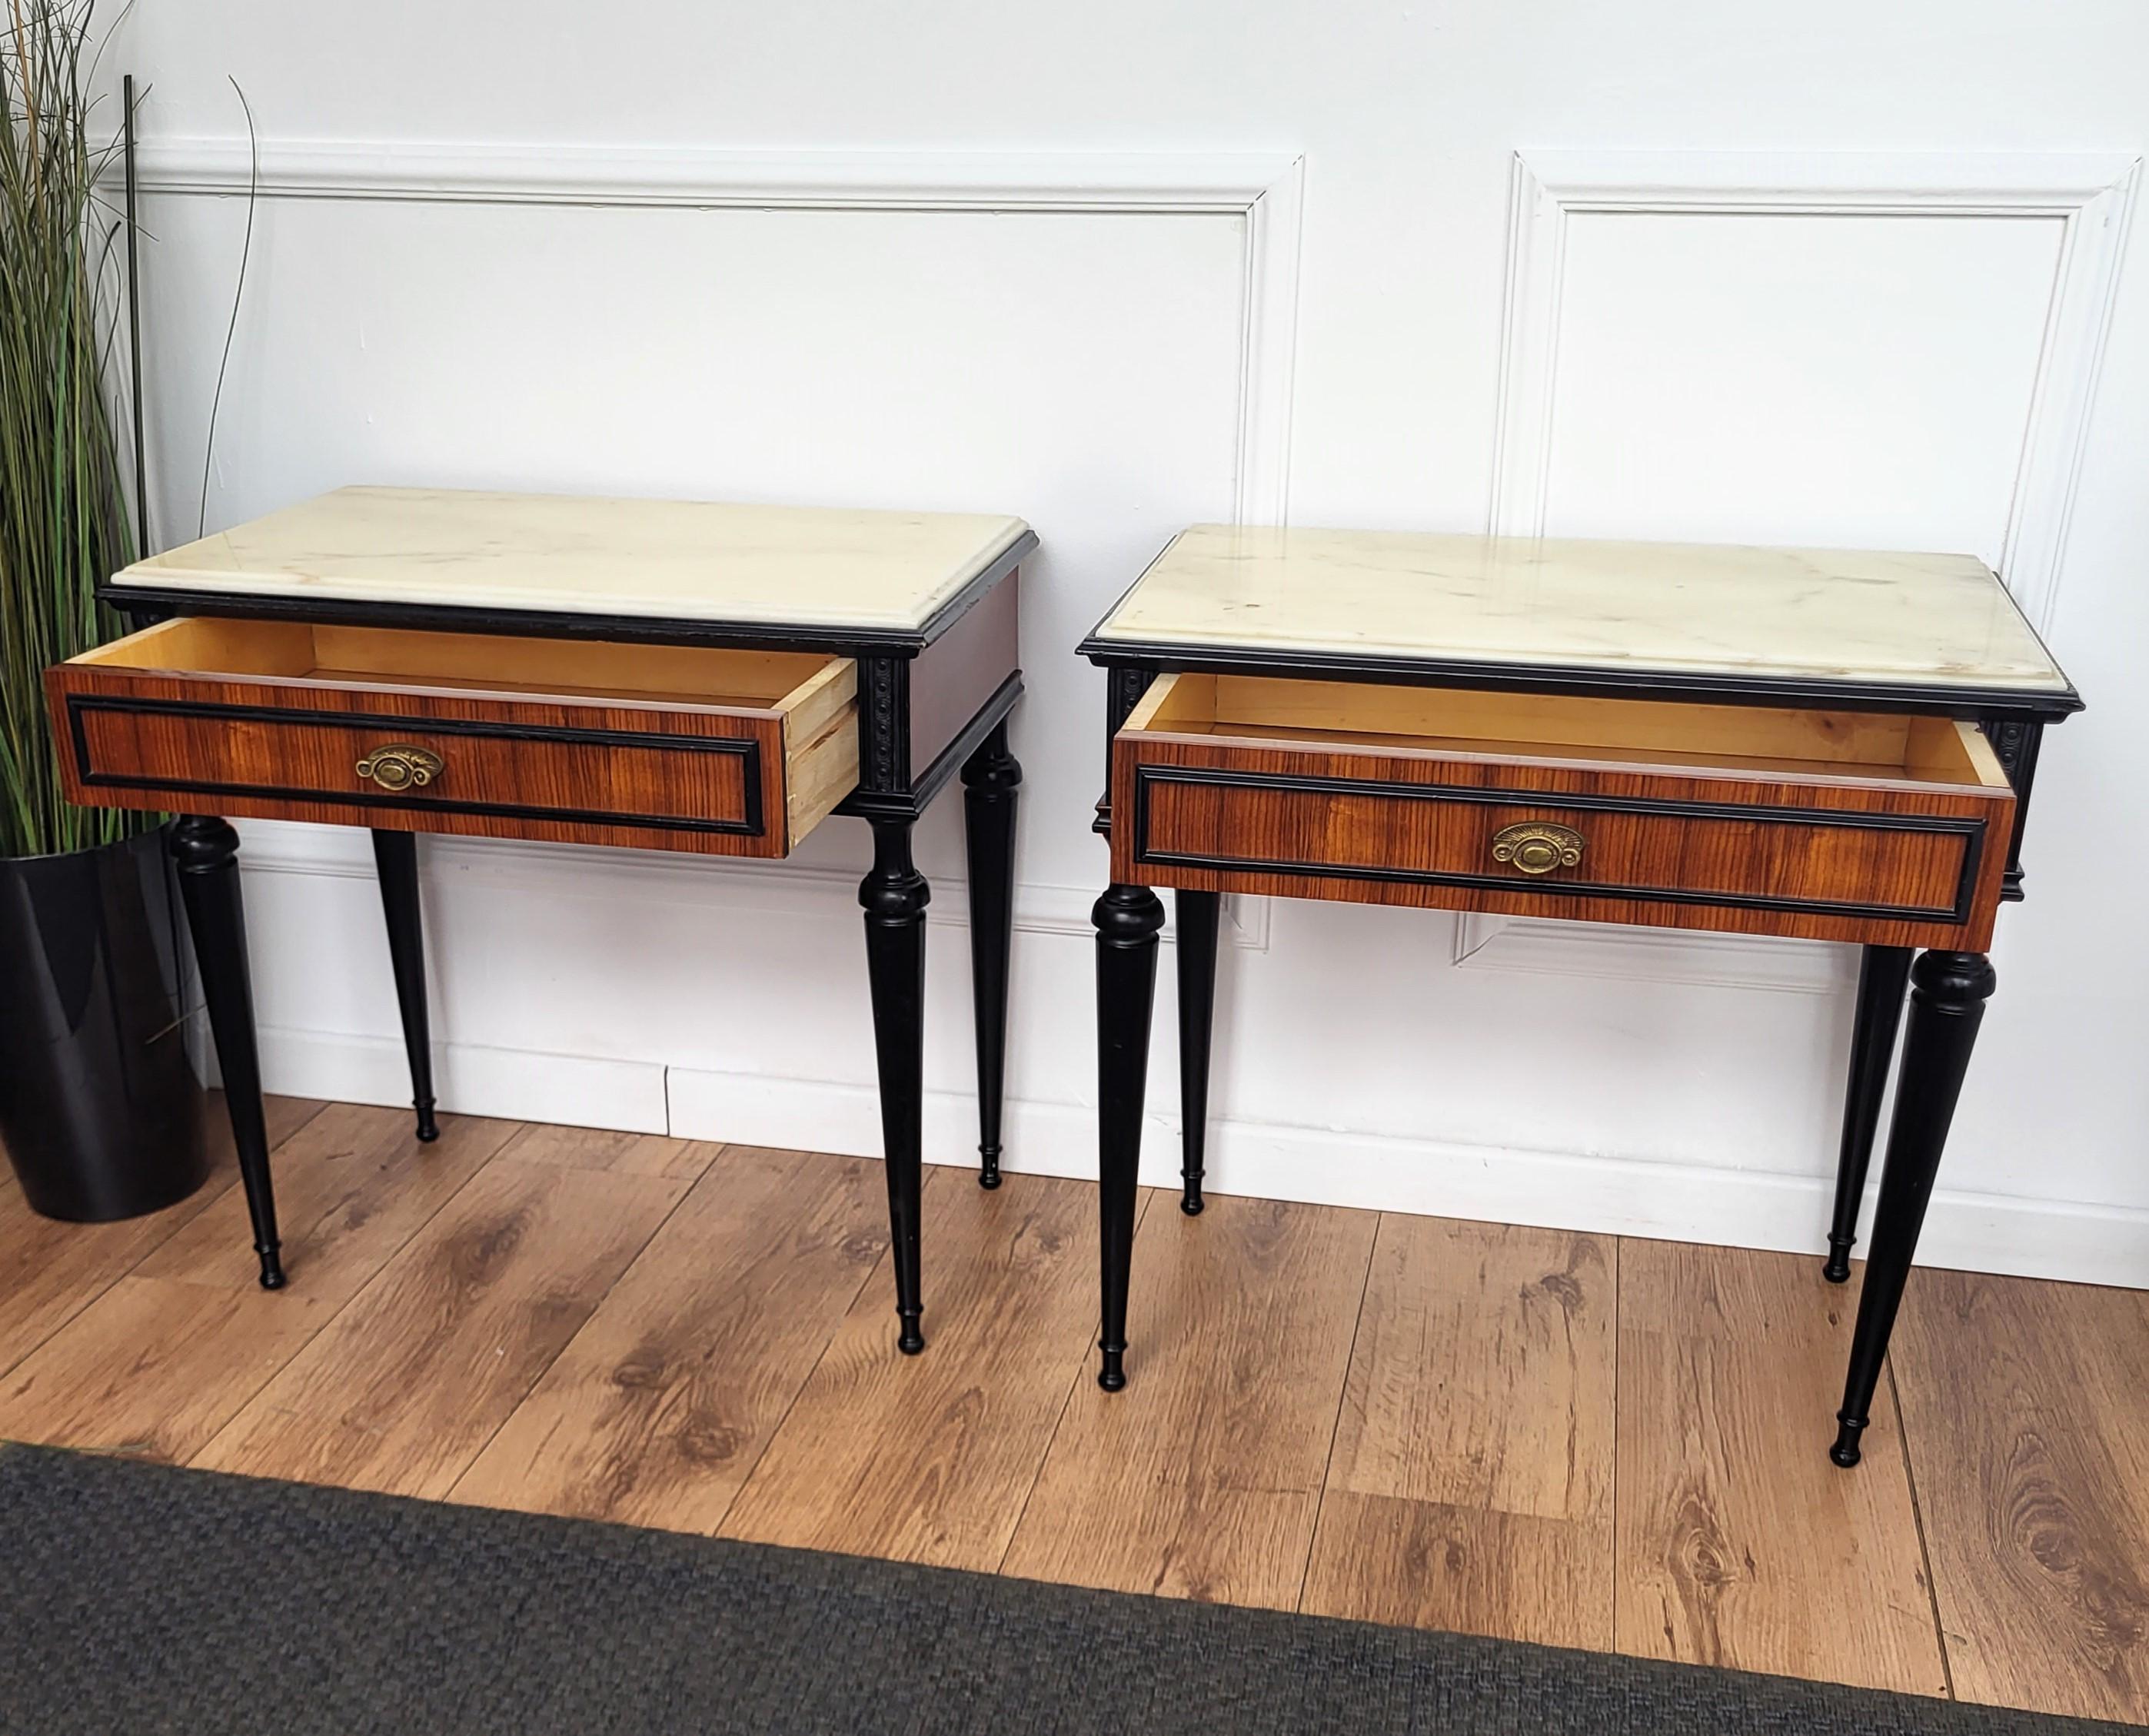 20th Century Pair of Italian Mid-Century Art Deco Wood Marble Top Night Stands Bedside Tables